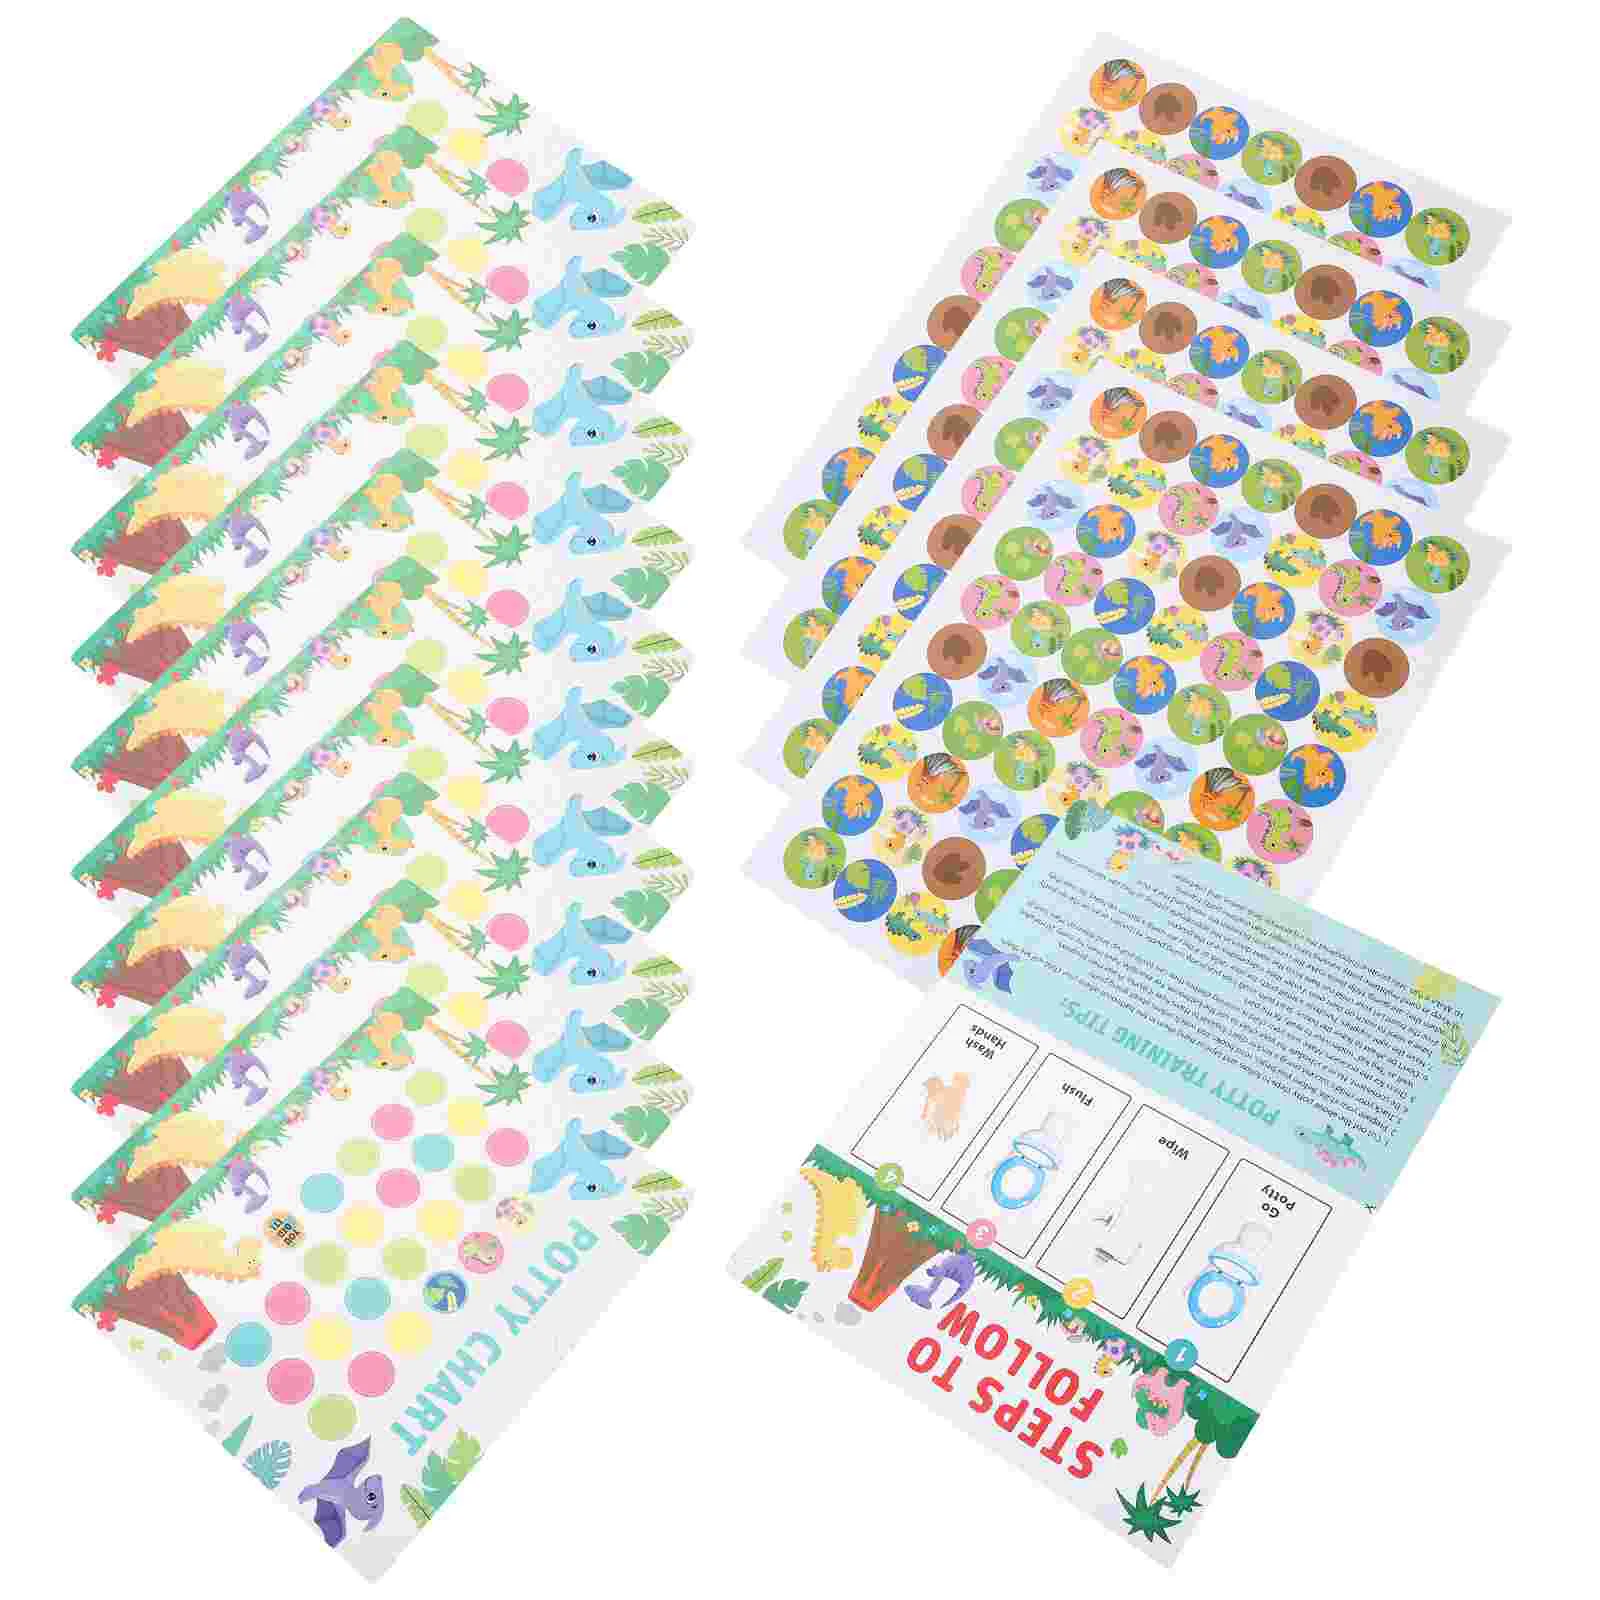 

1 Set Potty Training Decal Potty Training Chart with Sticker Toddler Potty Training Supplies